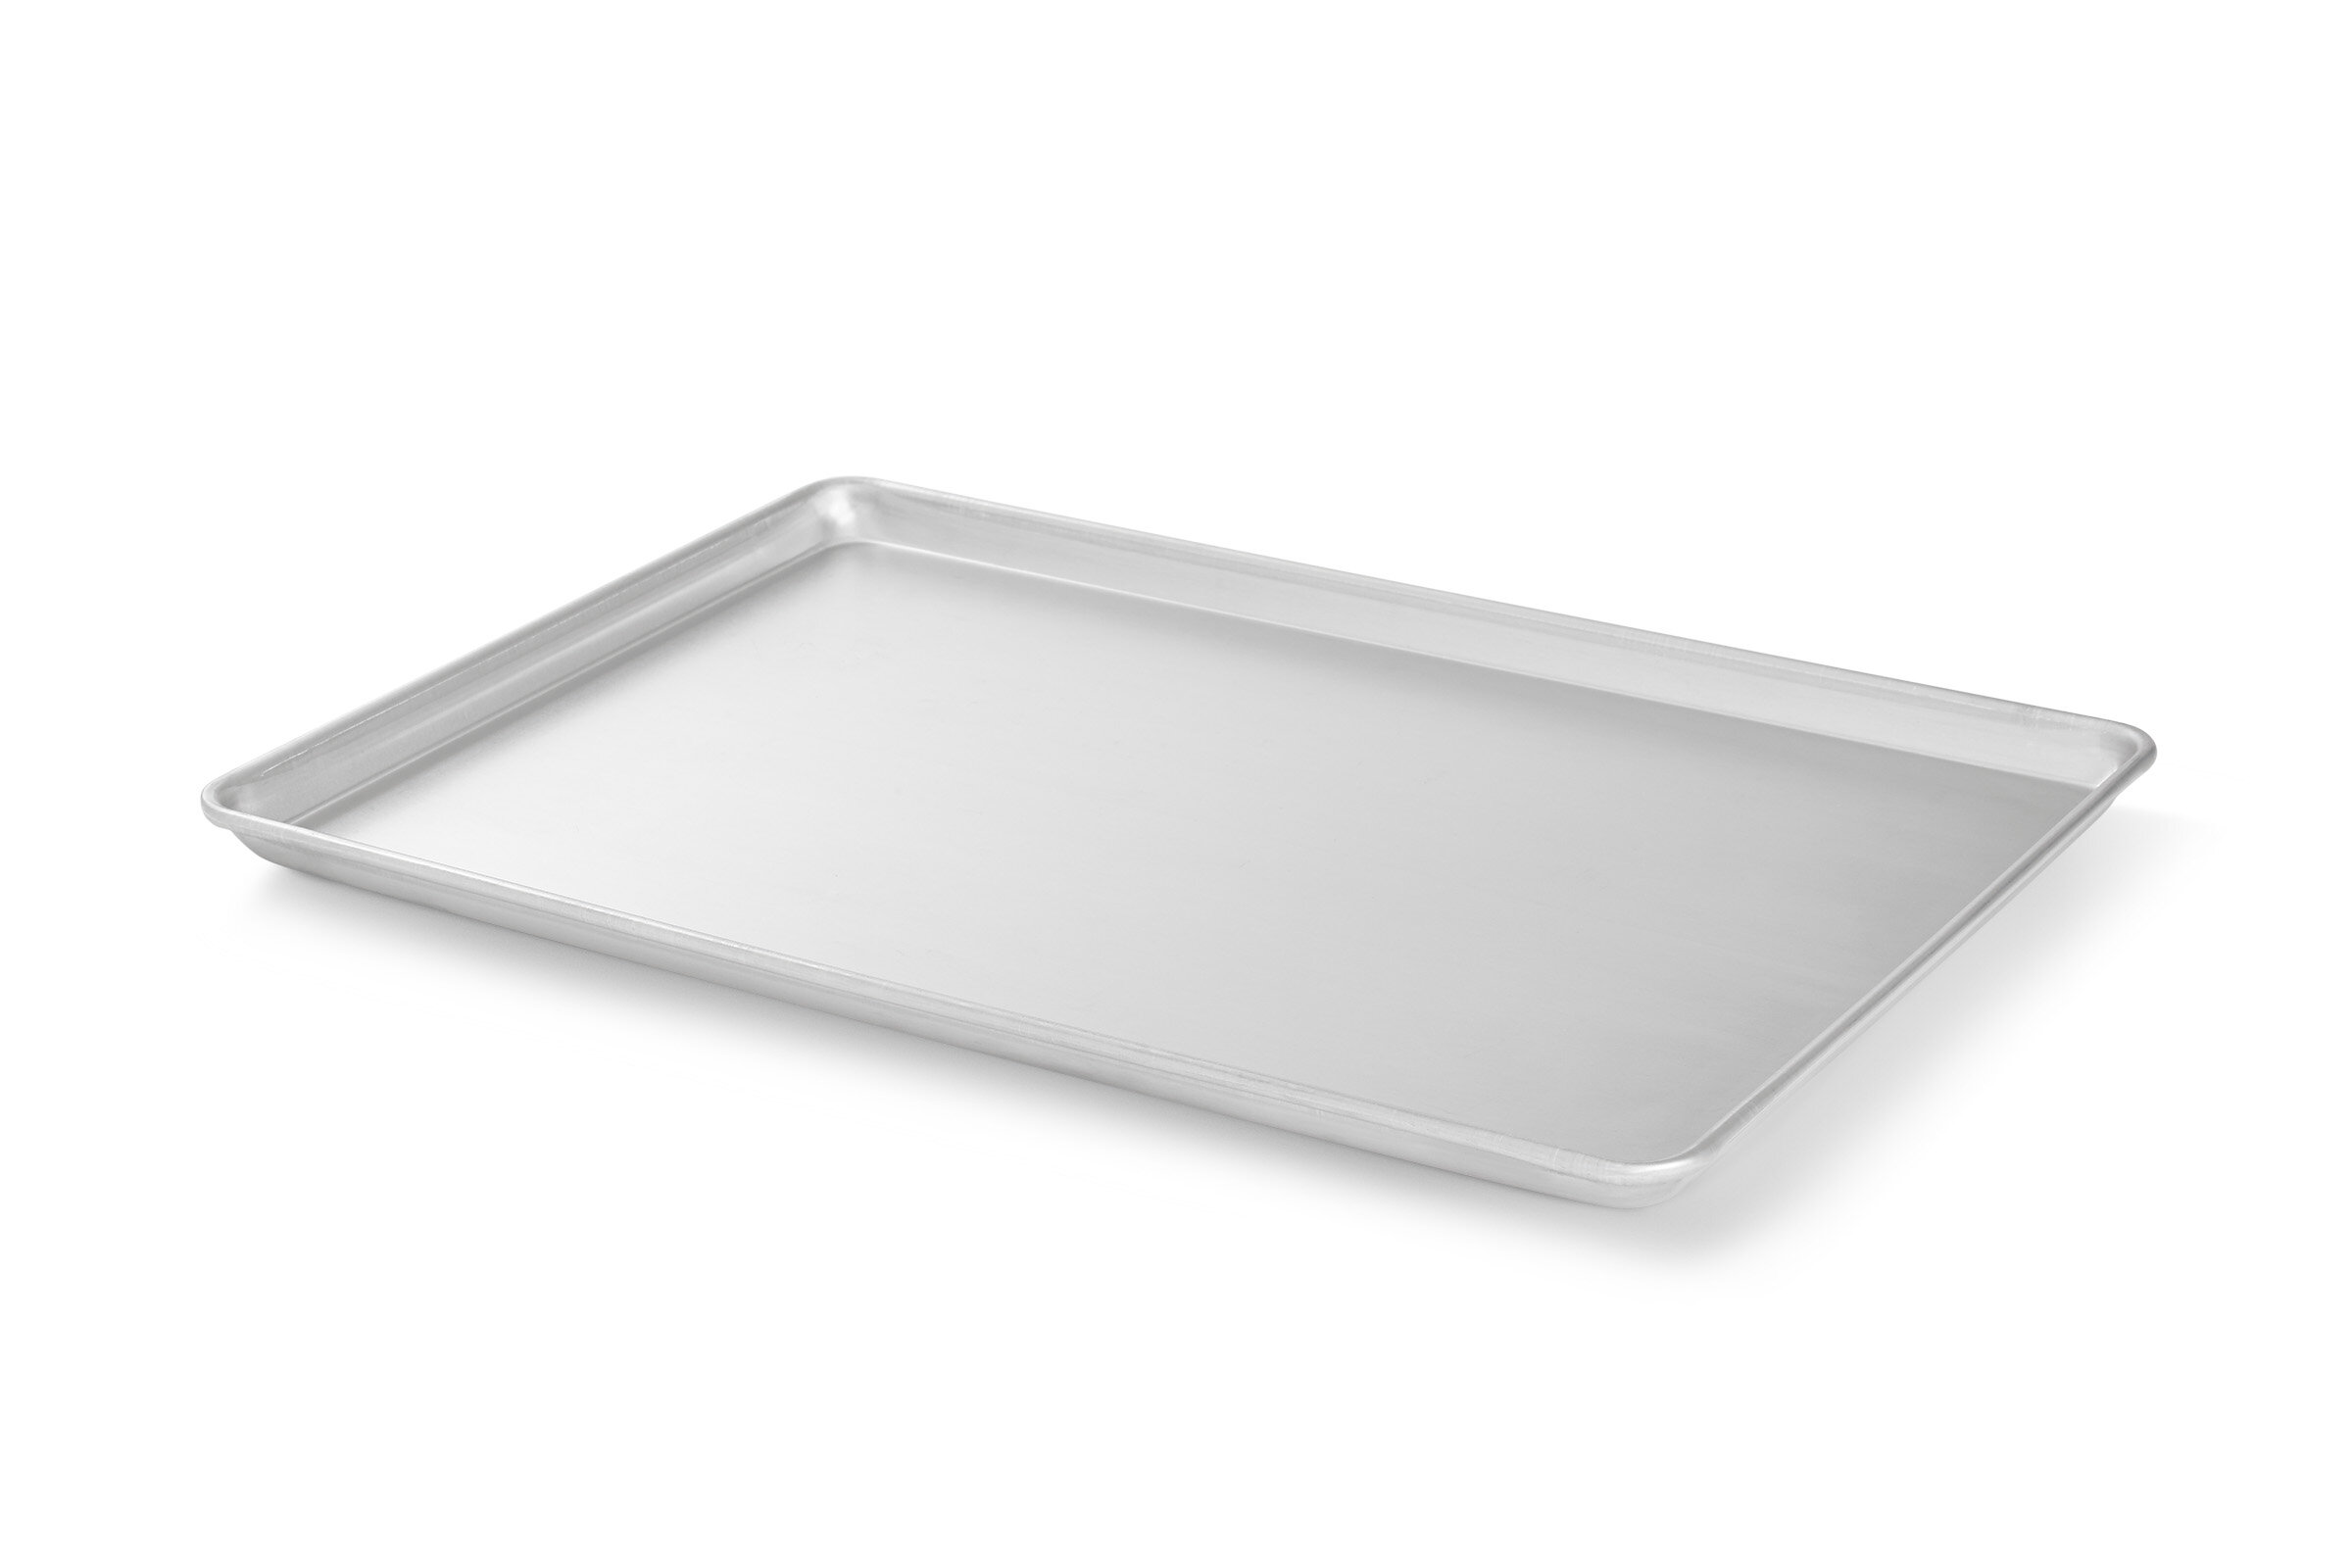 10 x 15 Baking Sheet - CHEFMADE official store